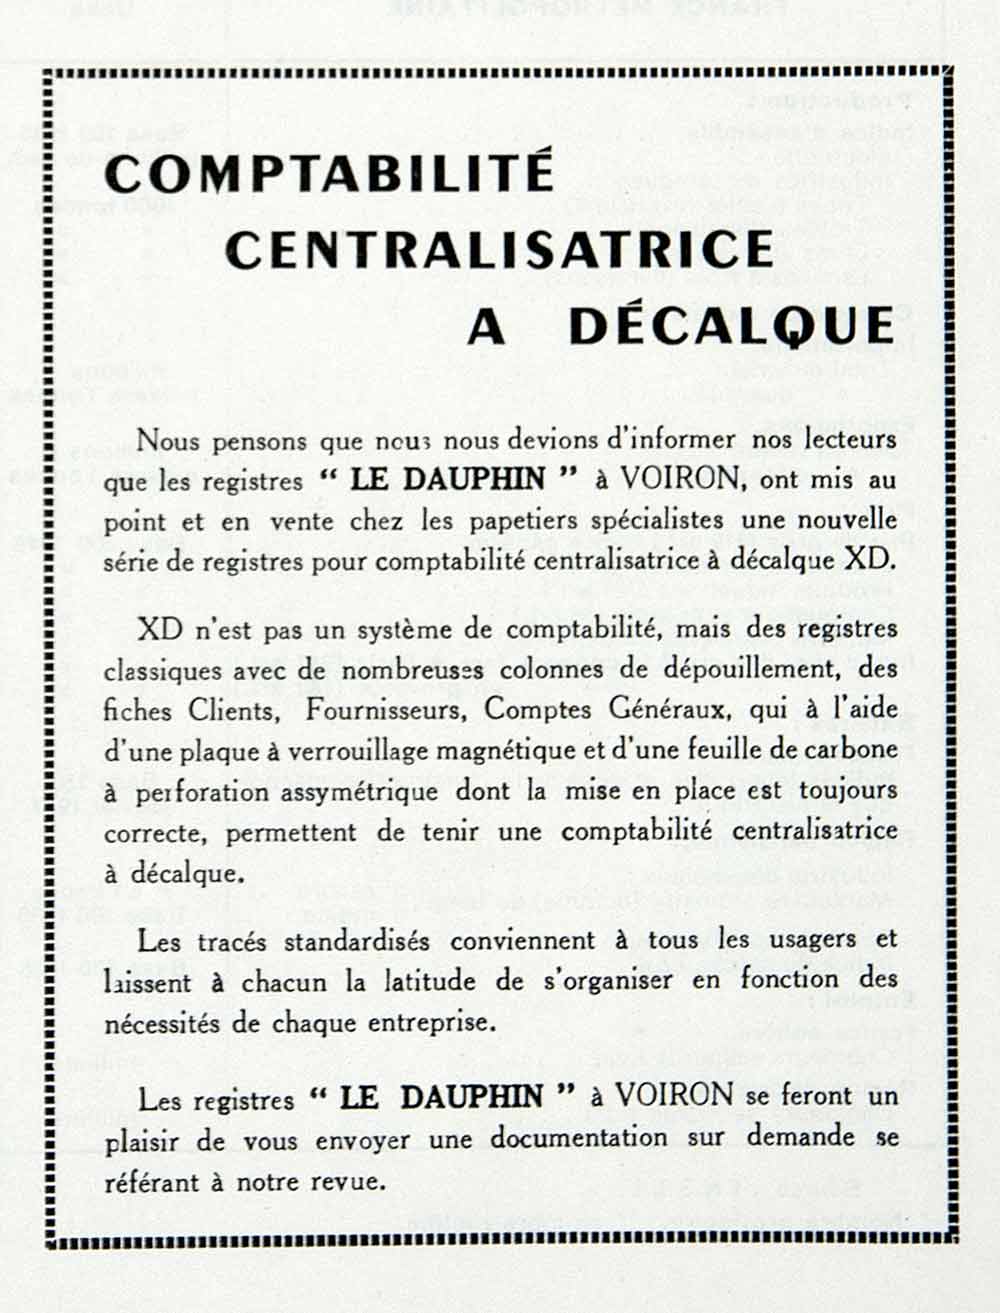 1955 Ad Le Dauphin Voiron Accounting French Business Clients Finance France VEN2